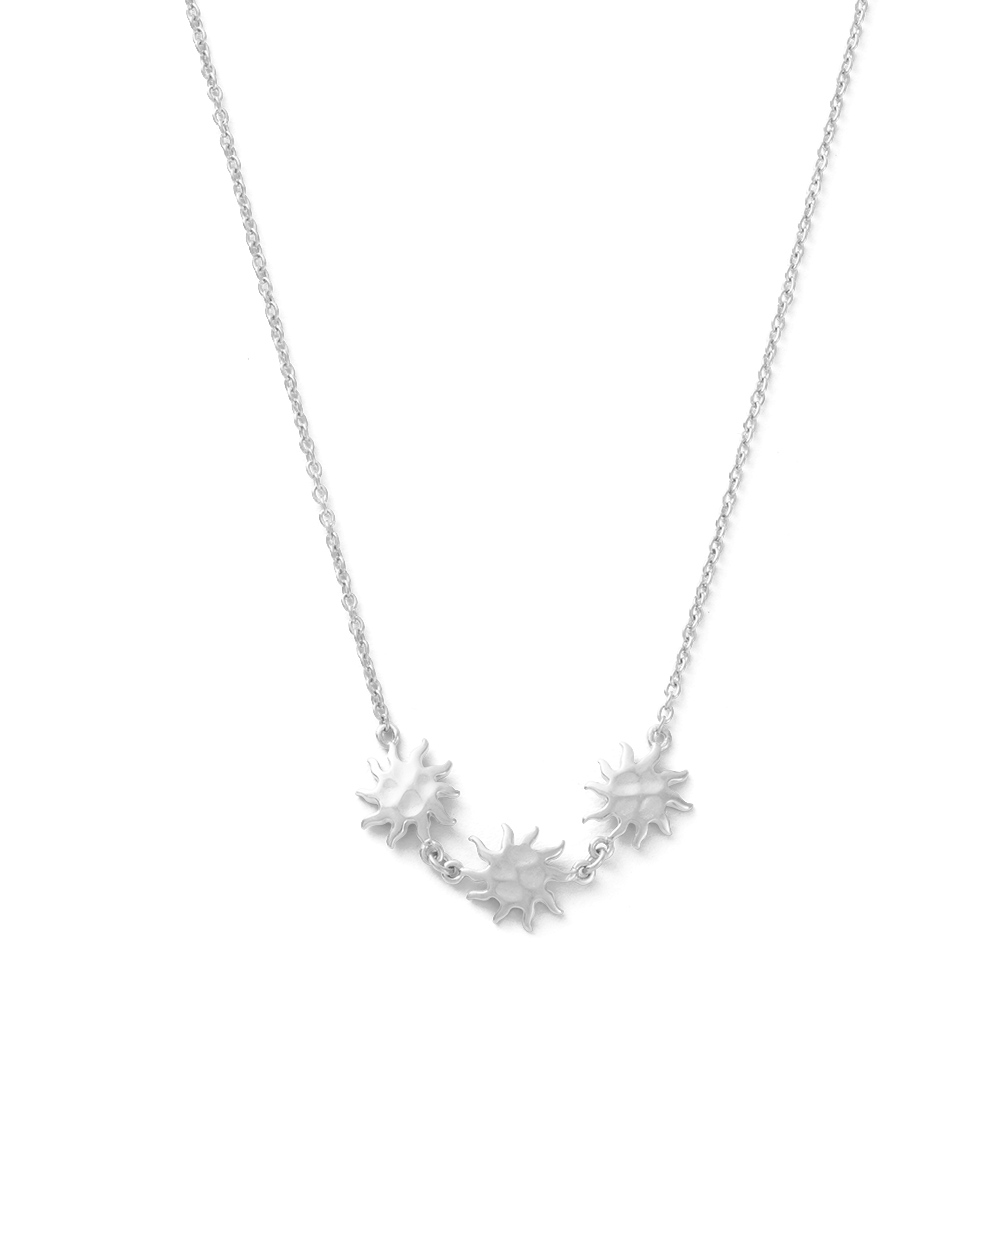 SOLIS NECKLACE (STERLING SILVER)